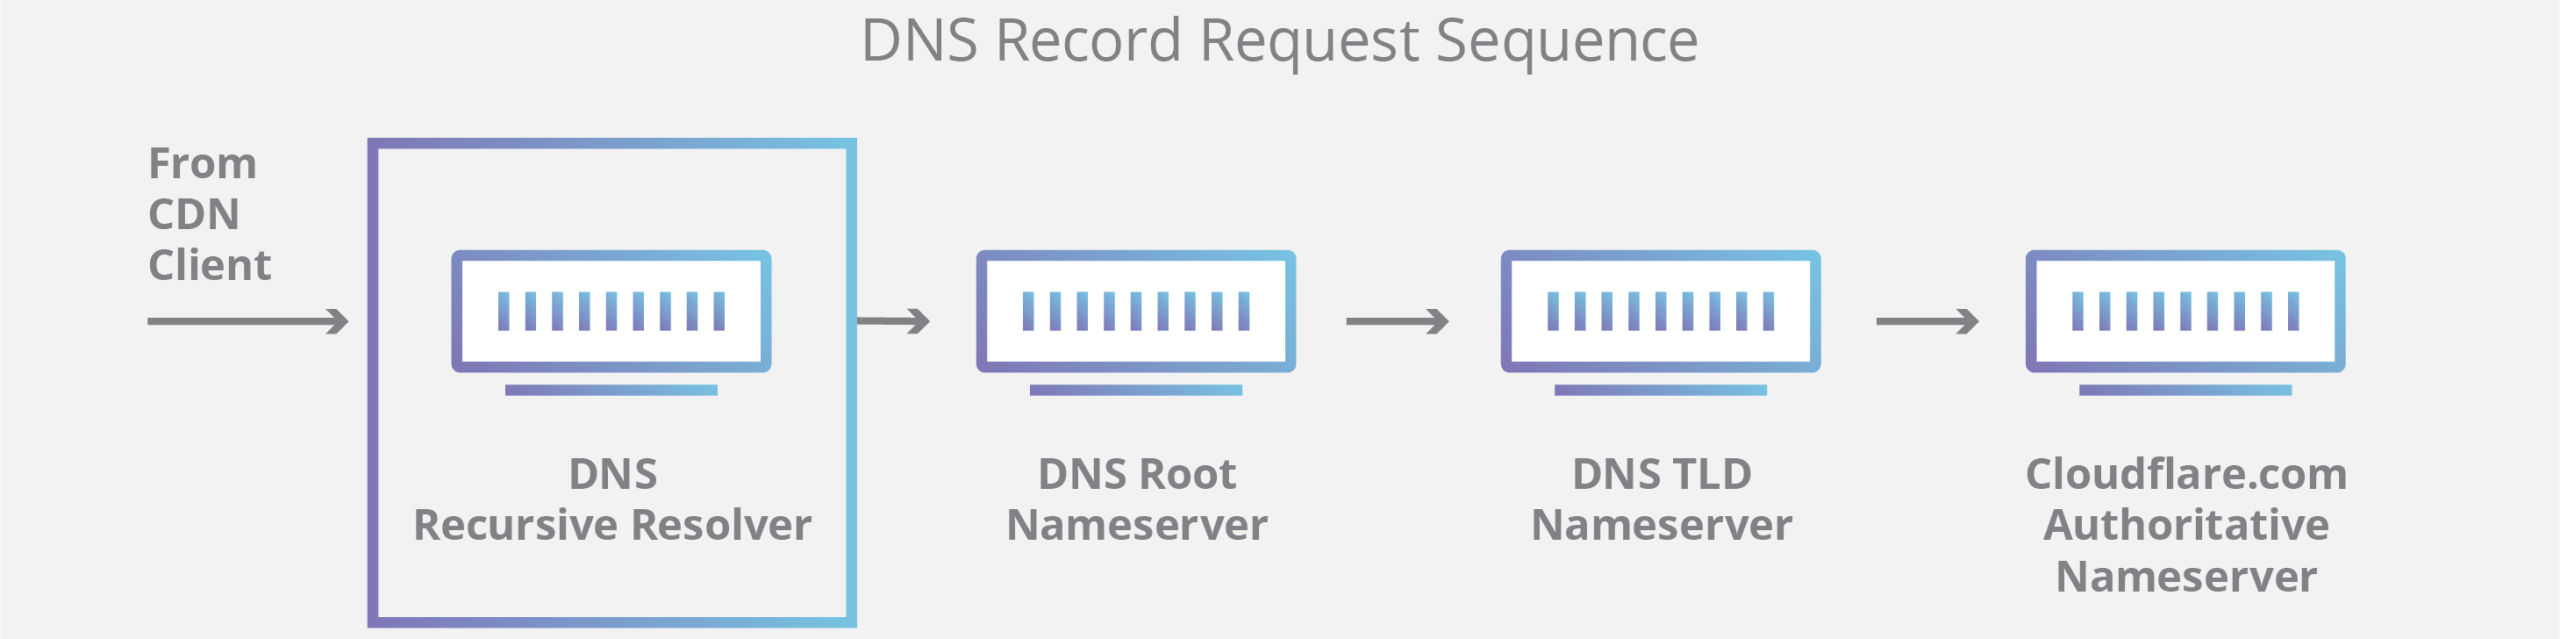 dns-record-request-sequence